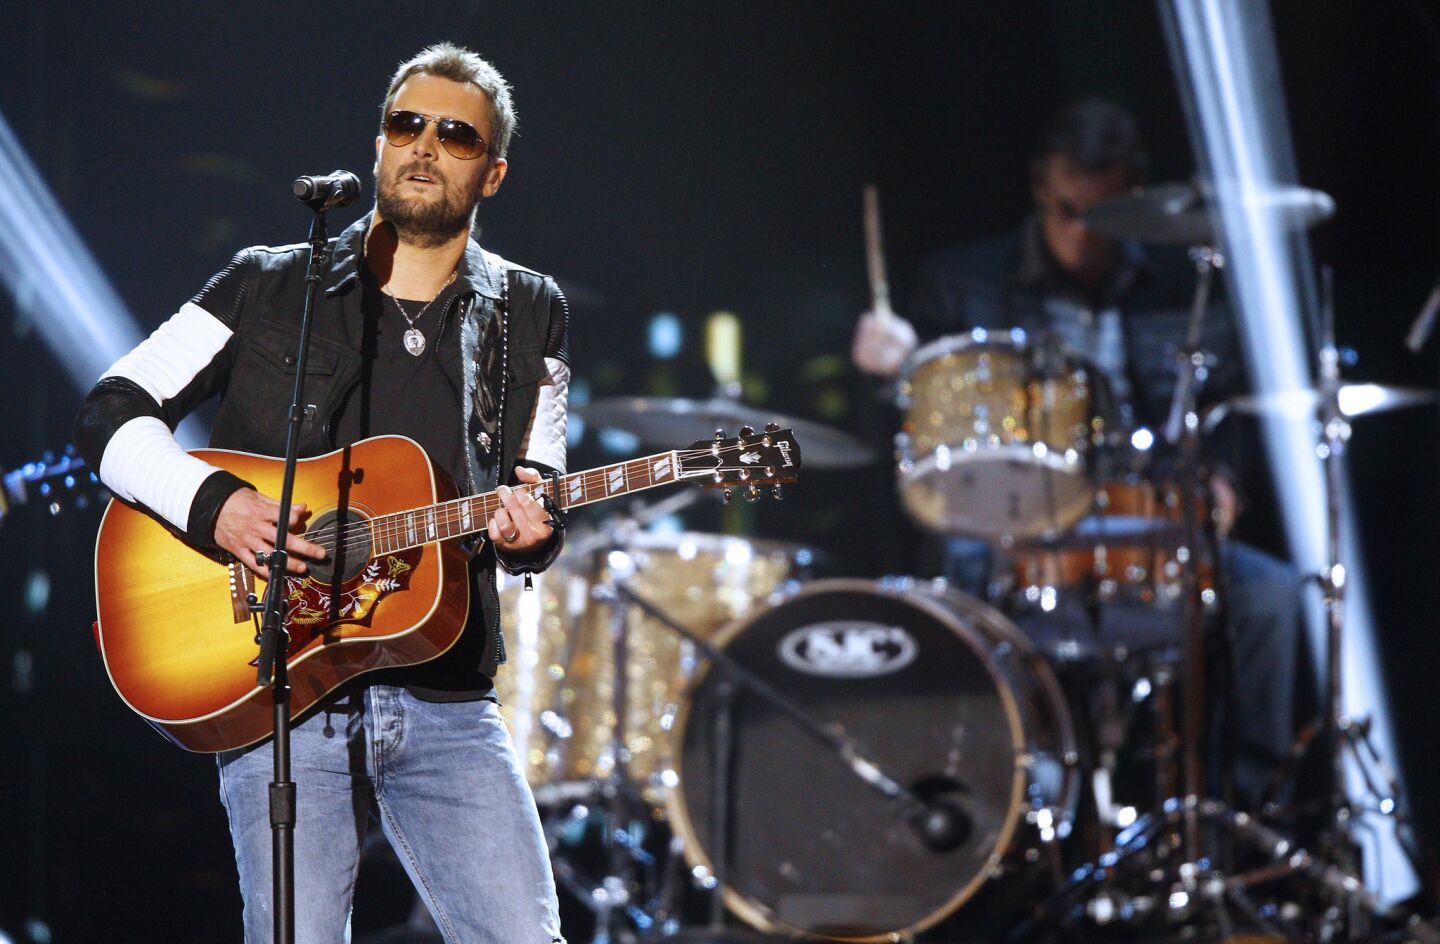 Eric Church, who will perform during the live telecast, is nominated for four awards this year: country solo performance, country song, country duo/group performance and country album.